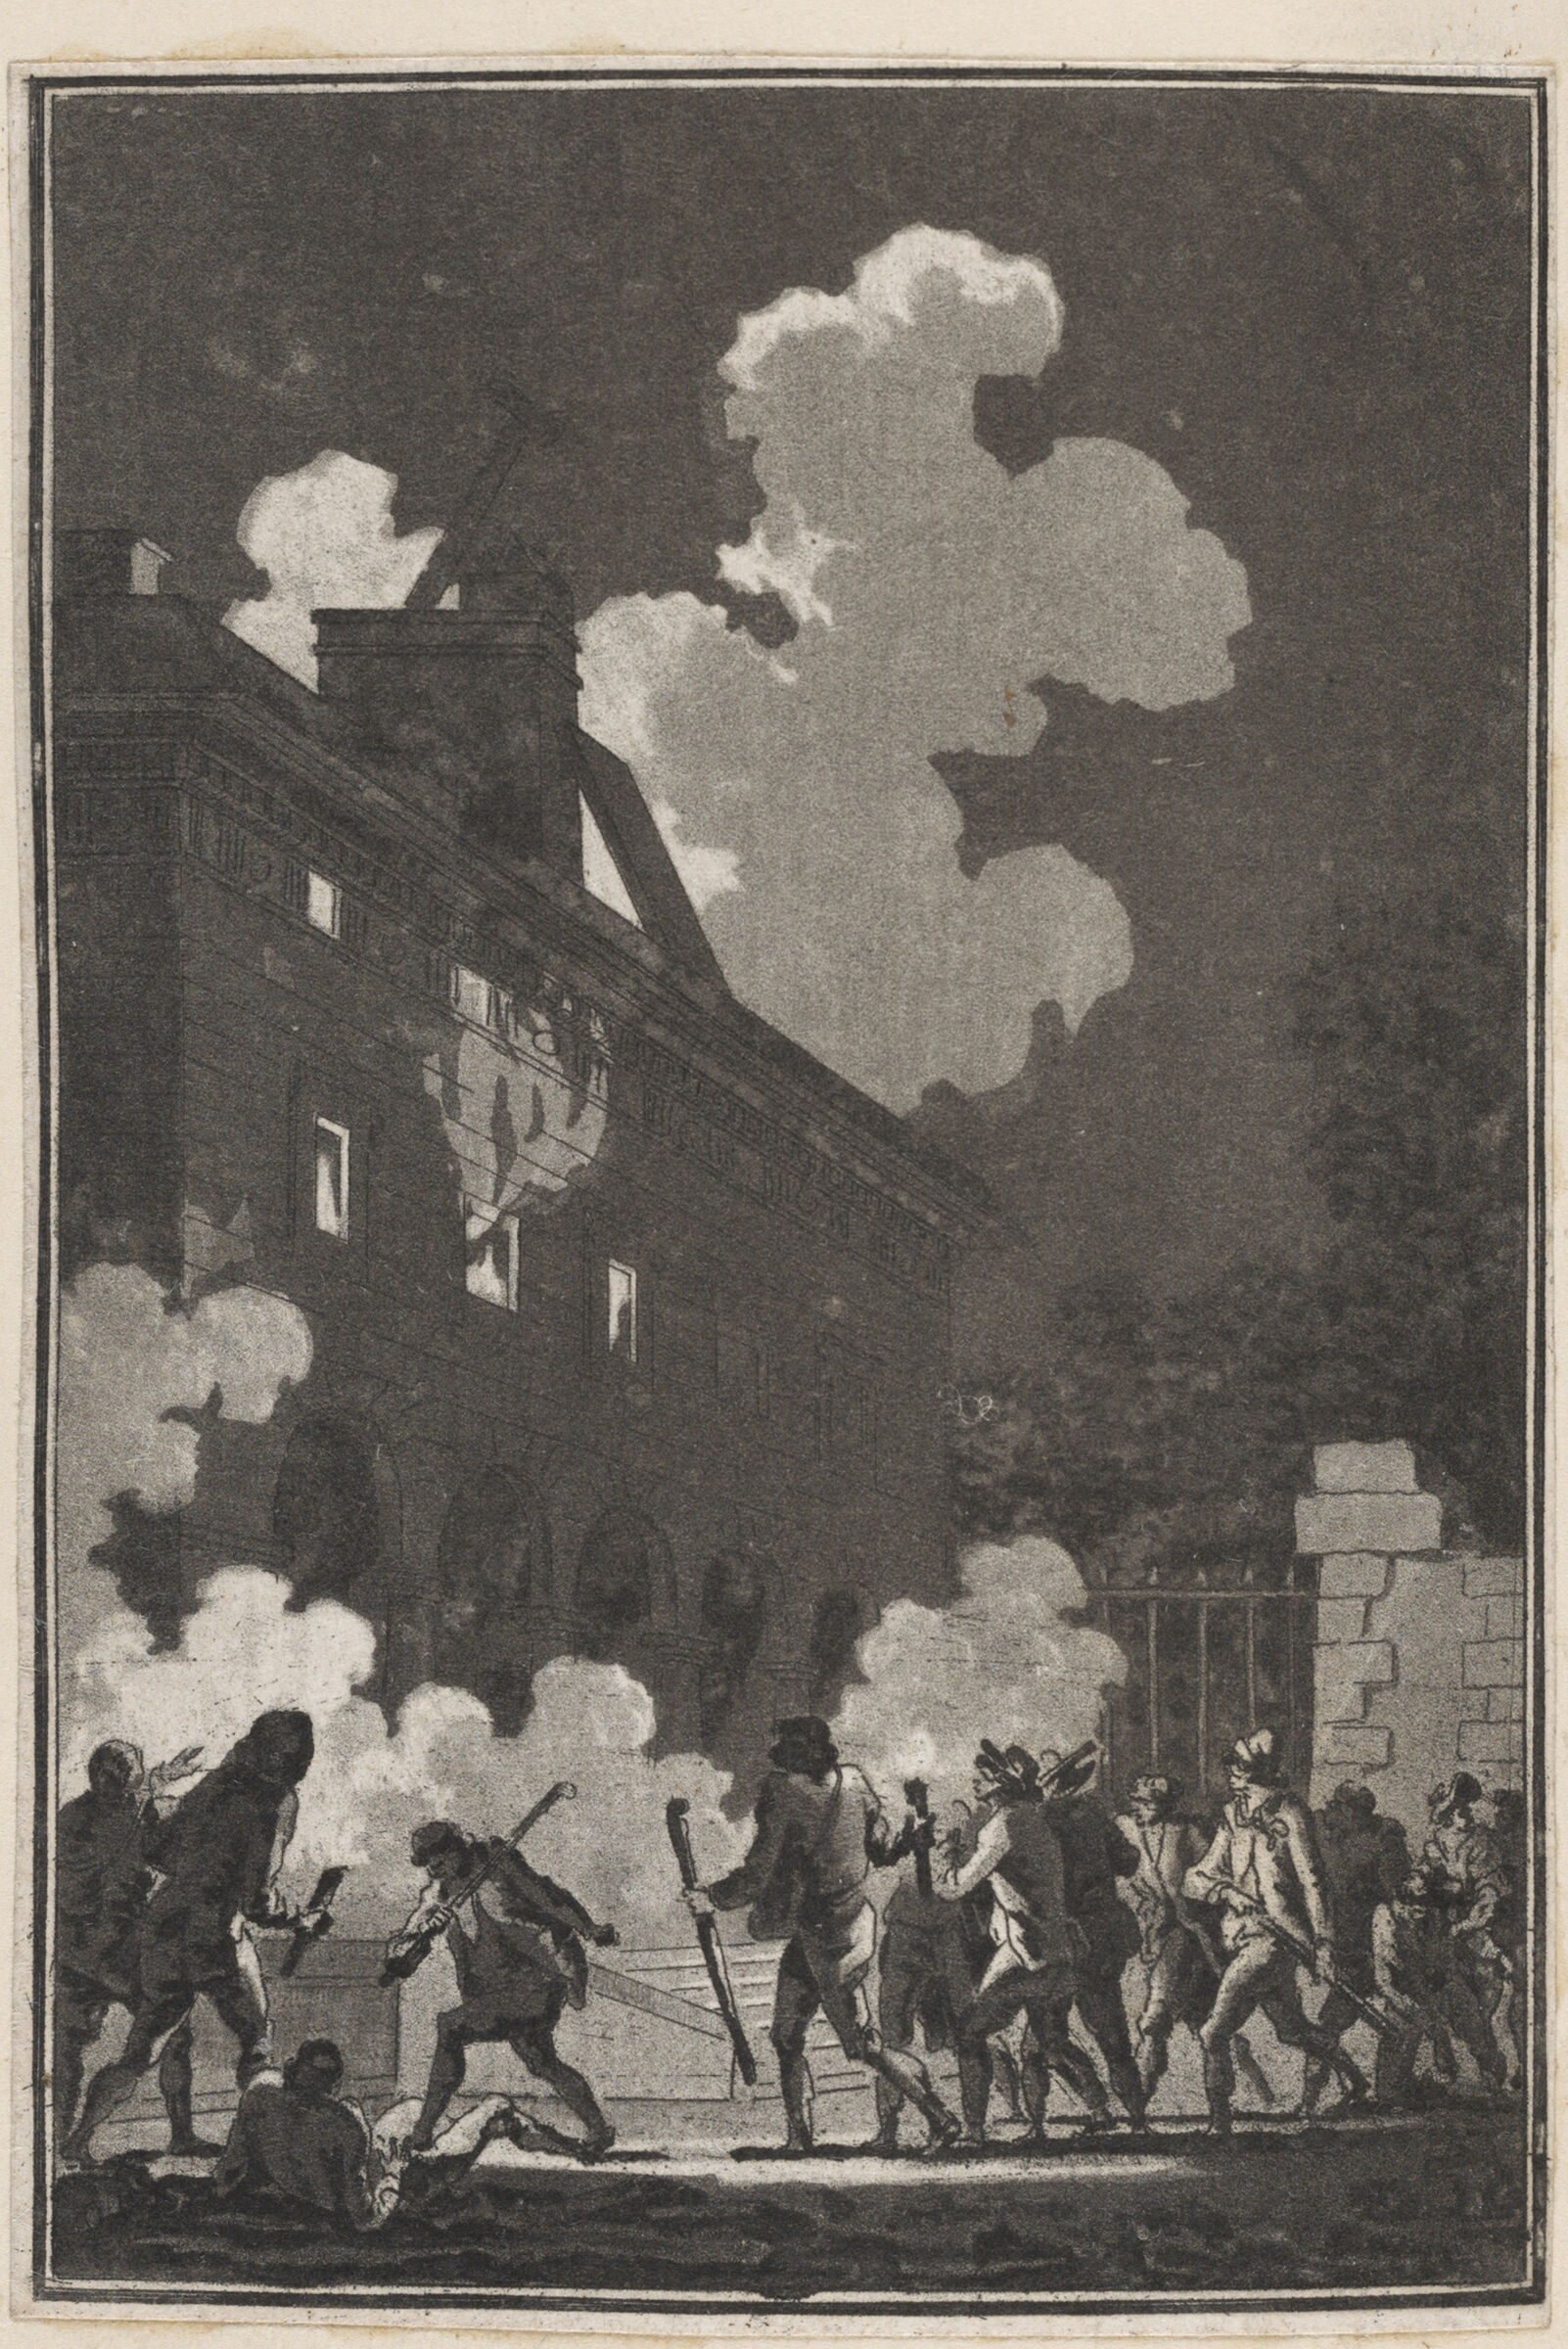 The Burning Of The New Tariff House Of Gobelins (12 July 1789)